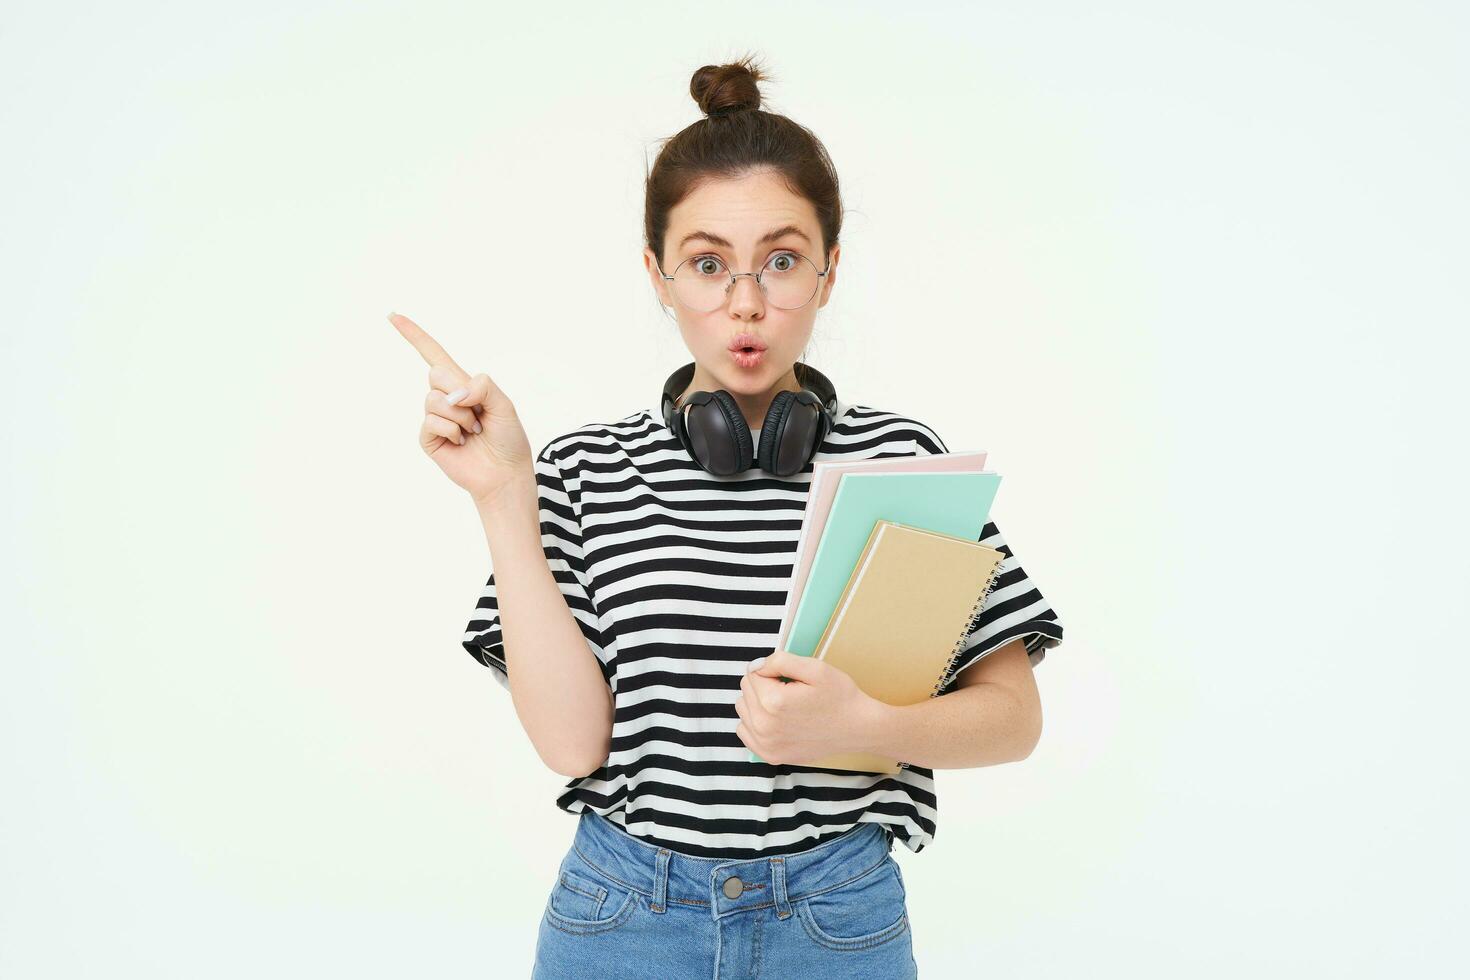 Portrait of girl with surprised face, interested in advertisement on the left, pointing at banner with curious face, wearing glasses, holding documents and notebooks in hand, white background photo